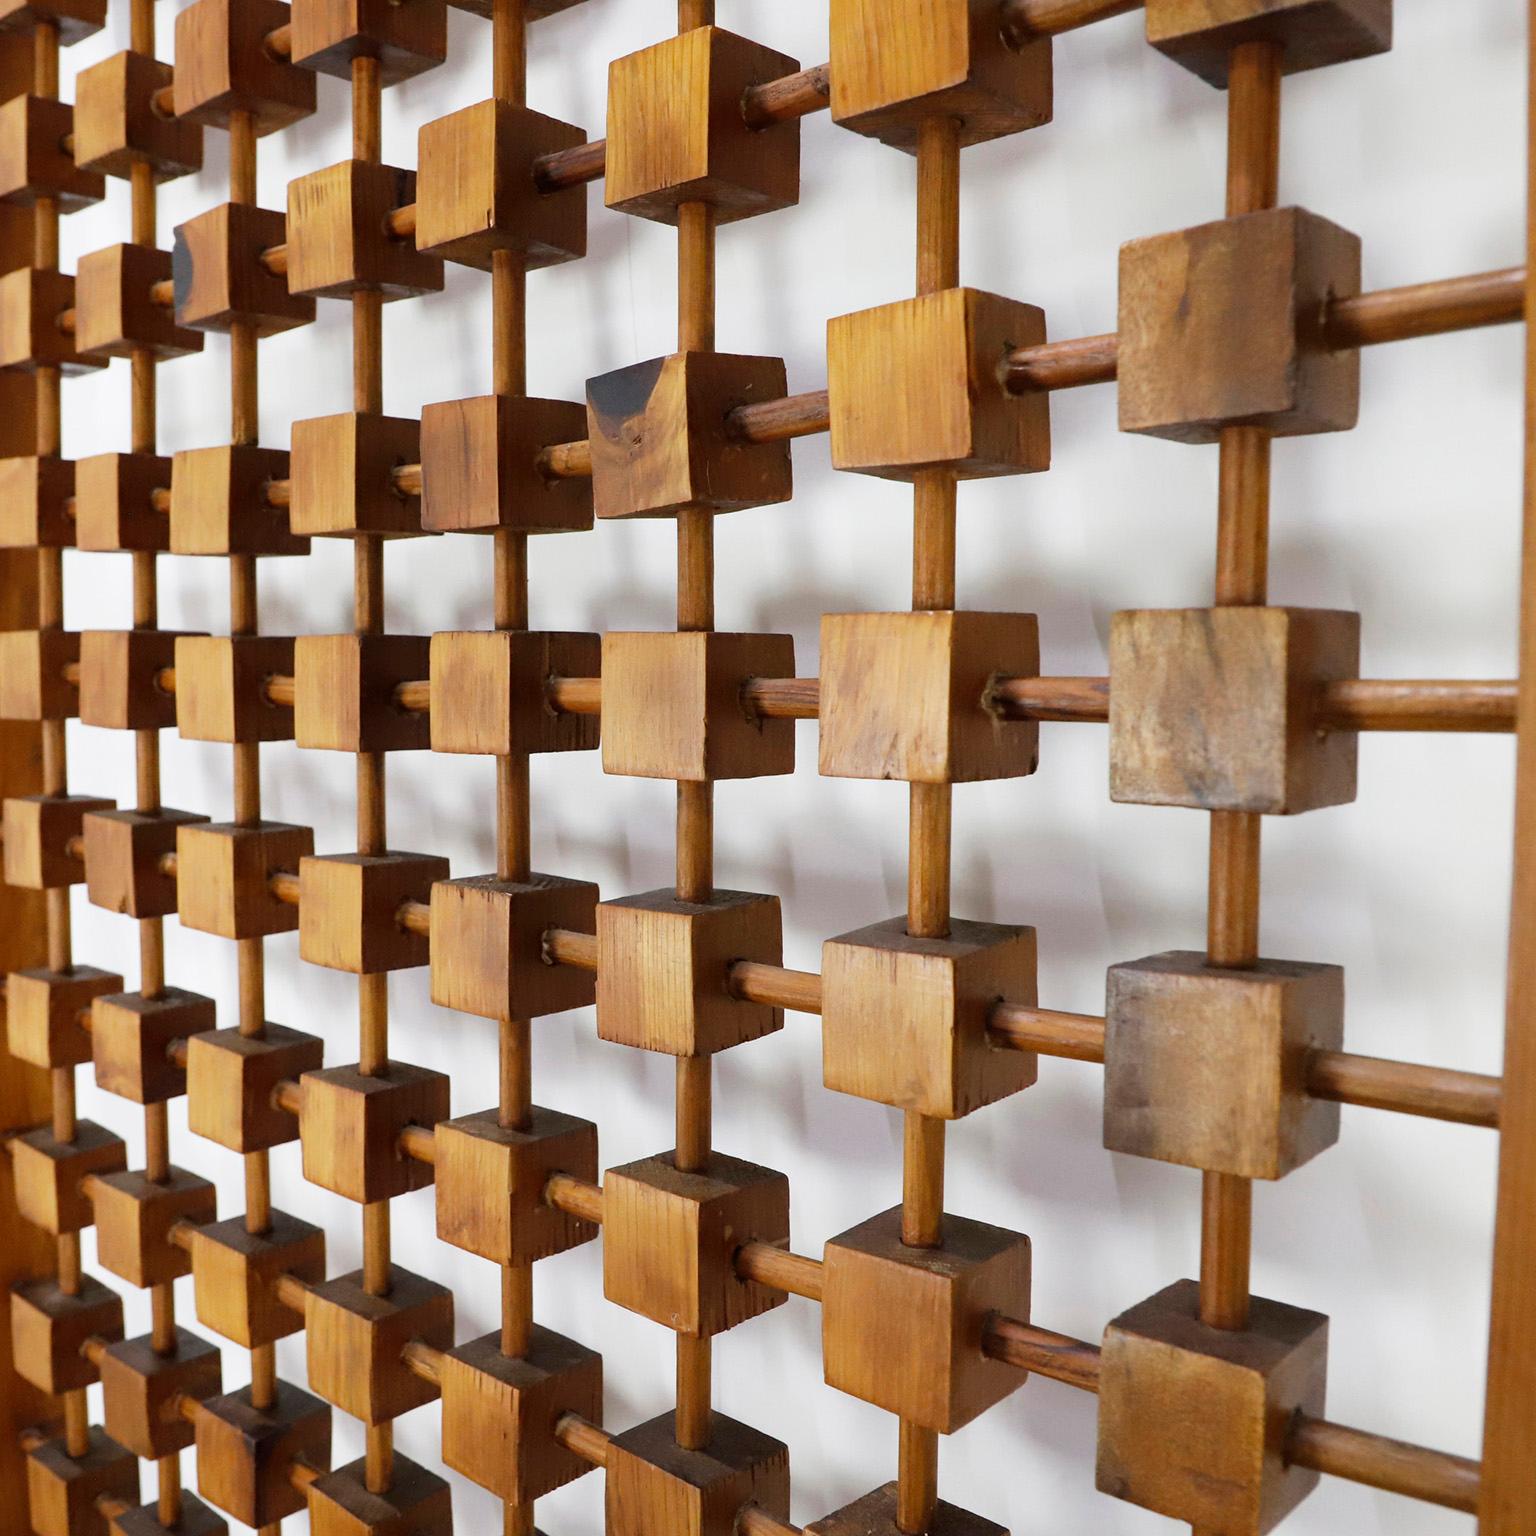 Circa 1960. We offer this MidCentury Lattice Wall Panel made in solid pine wood. Recently restored.